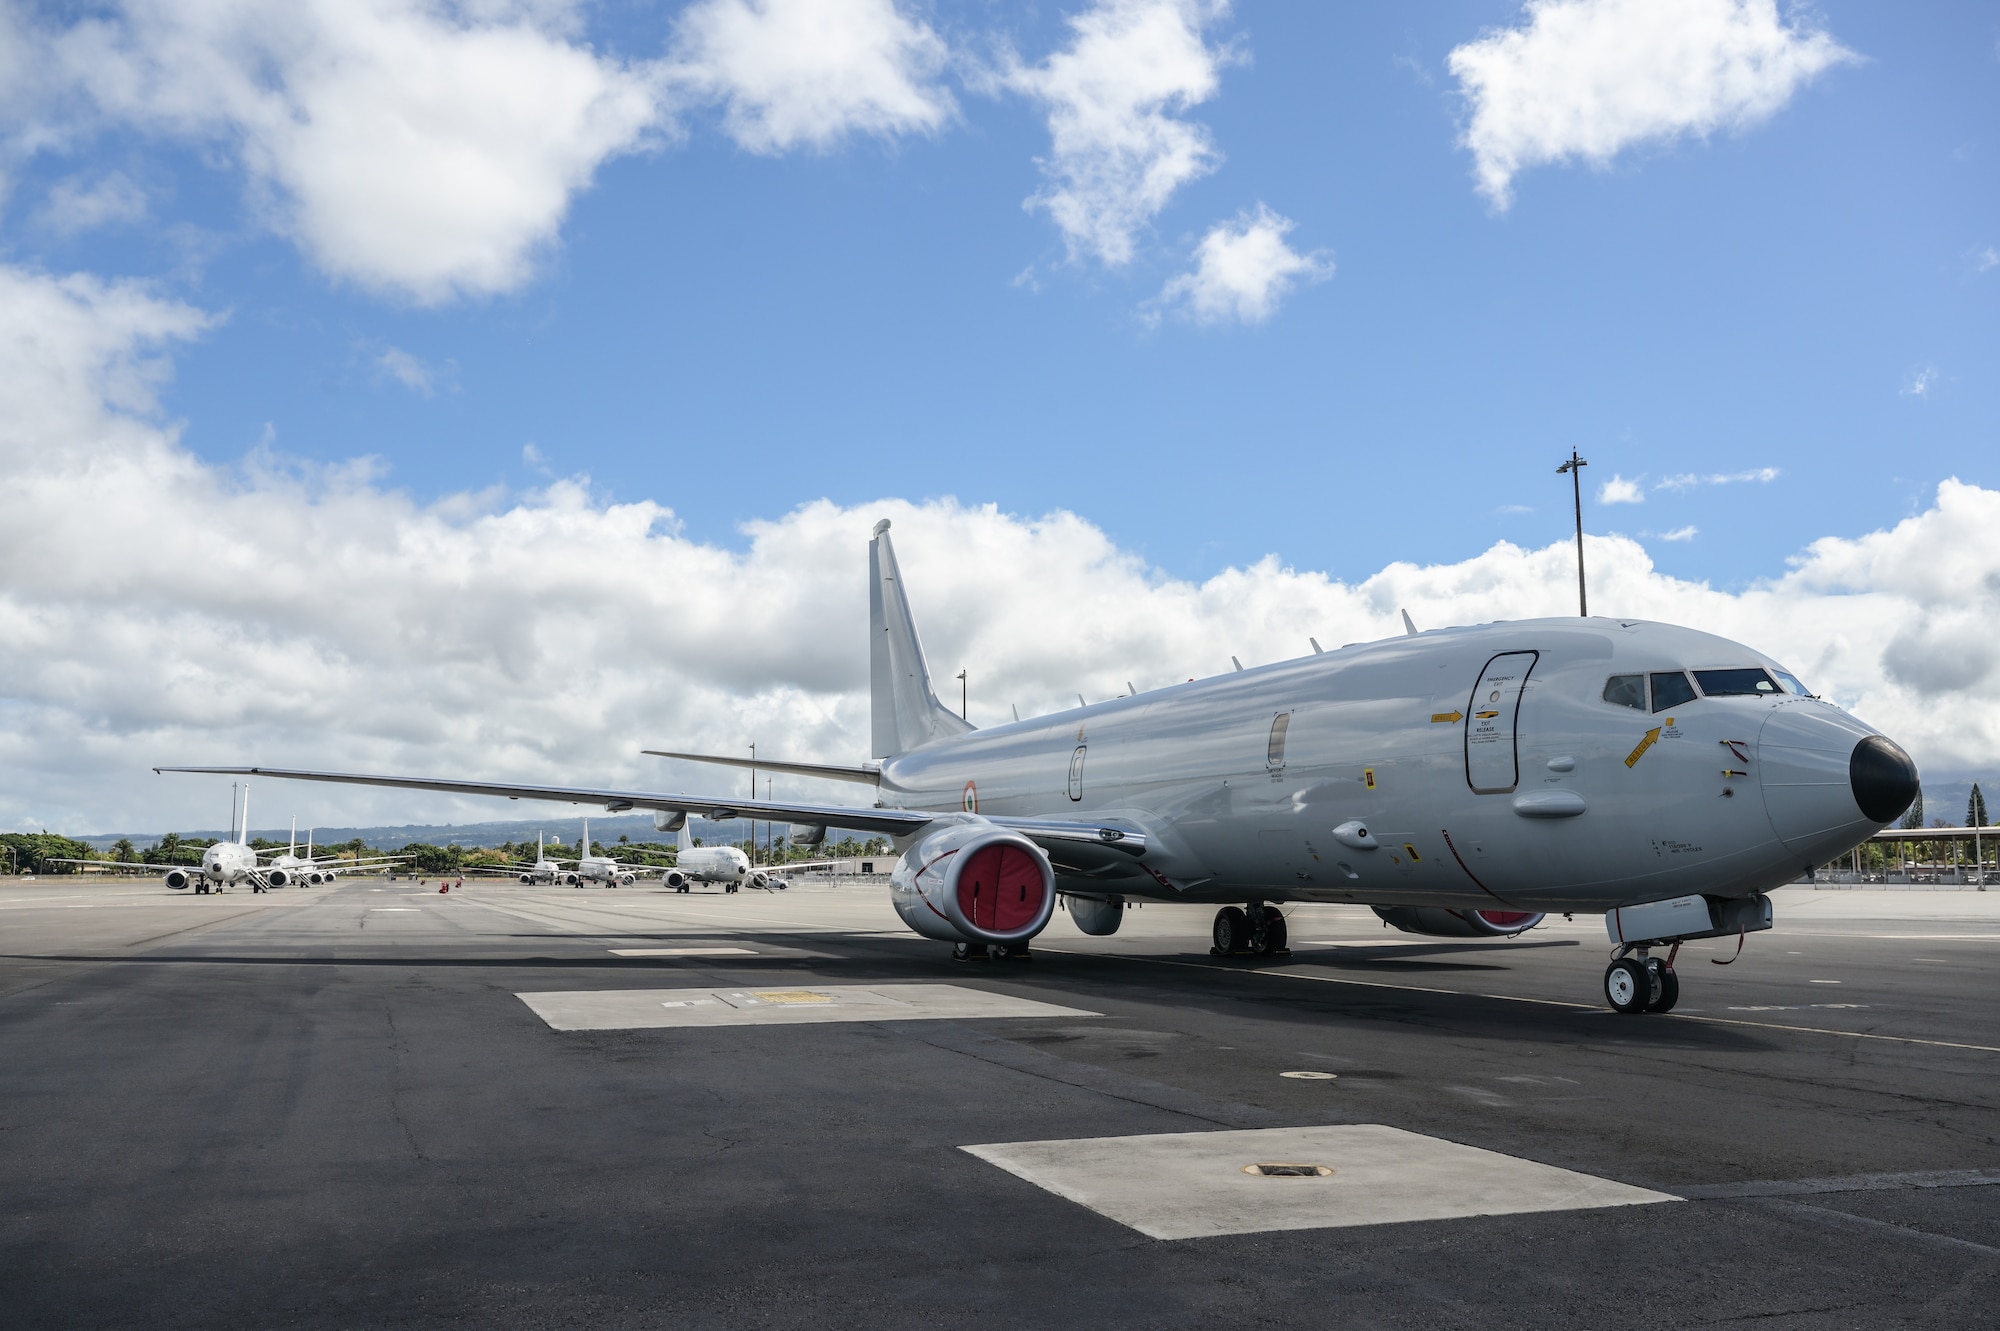 An Indian Navy P-8 Poseidon is positioned in a parking spot during Rim of the Pacific Exercise 2022 at Joint Base Pearl Harbor-Hickam, Hawaii, June 25, 2022. More than 30 nations are participating in this year’s biennial exercise, which is the world’s largest international maritime exercise. (U.S. Air Force photo by Staff Sgt. Alan Ricker)